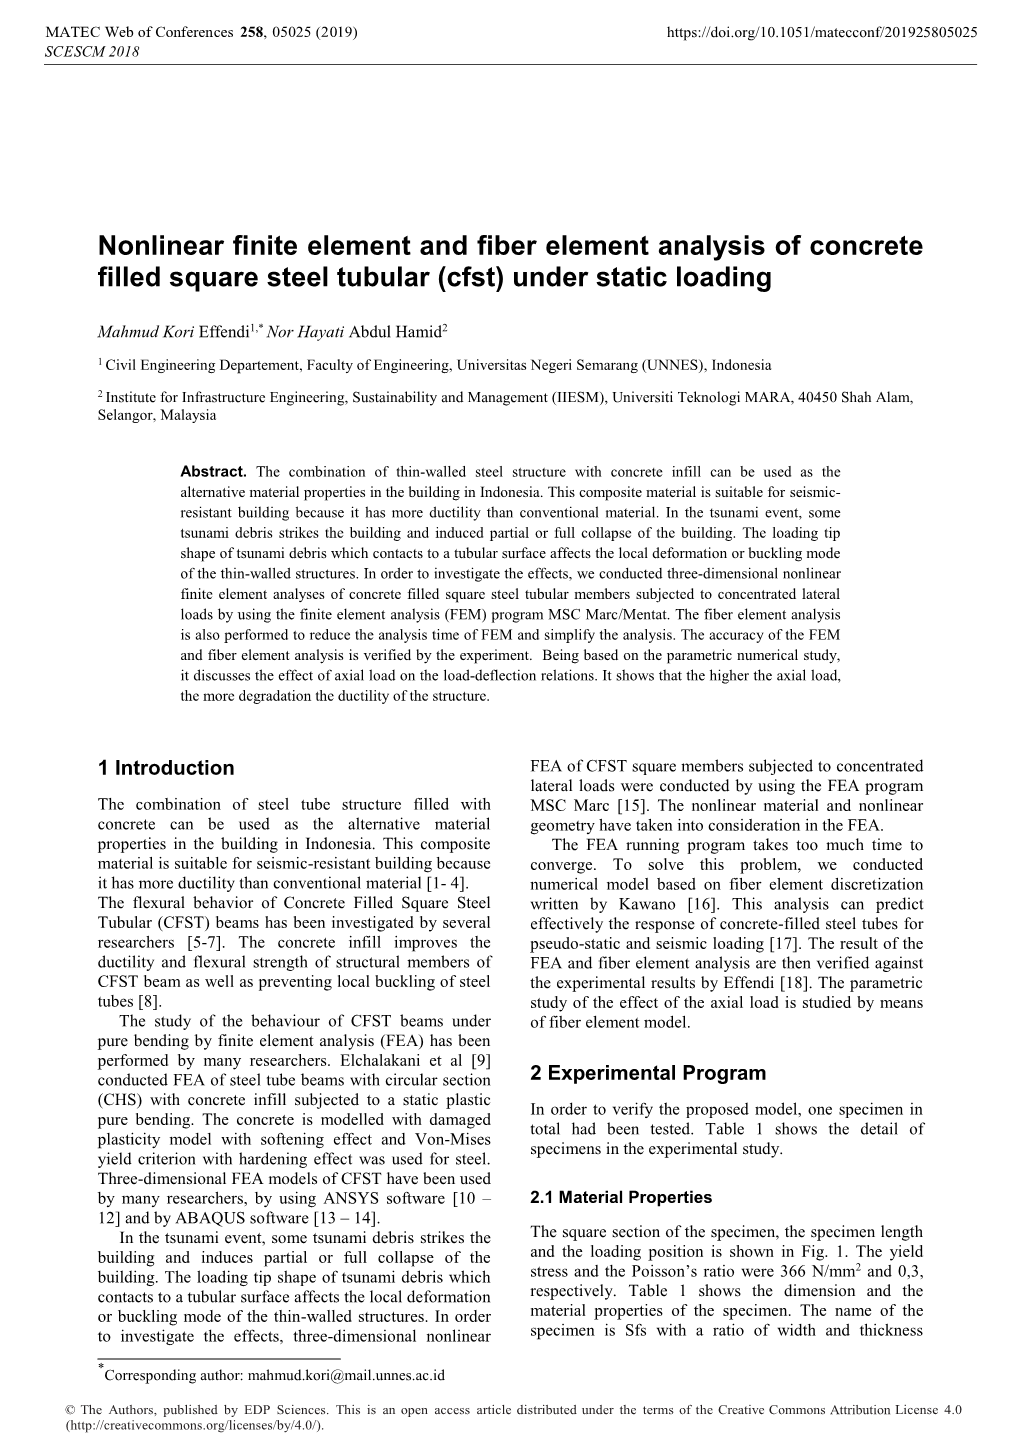 Nonlinear Finite Element and Fiber Element Analysis of Concrete Filled Square Steel Tubular (Cfst) Under Static Loading